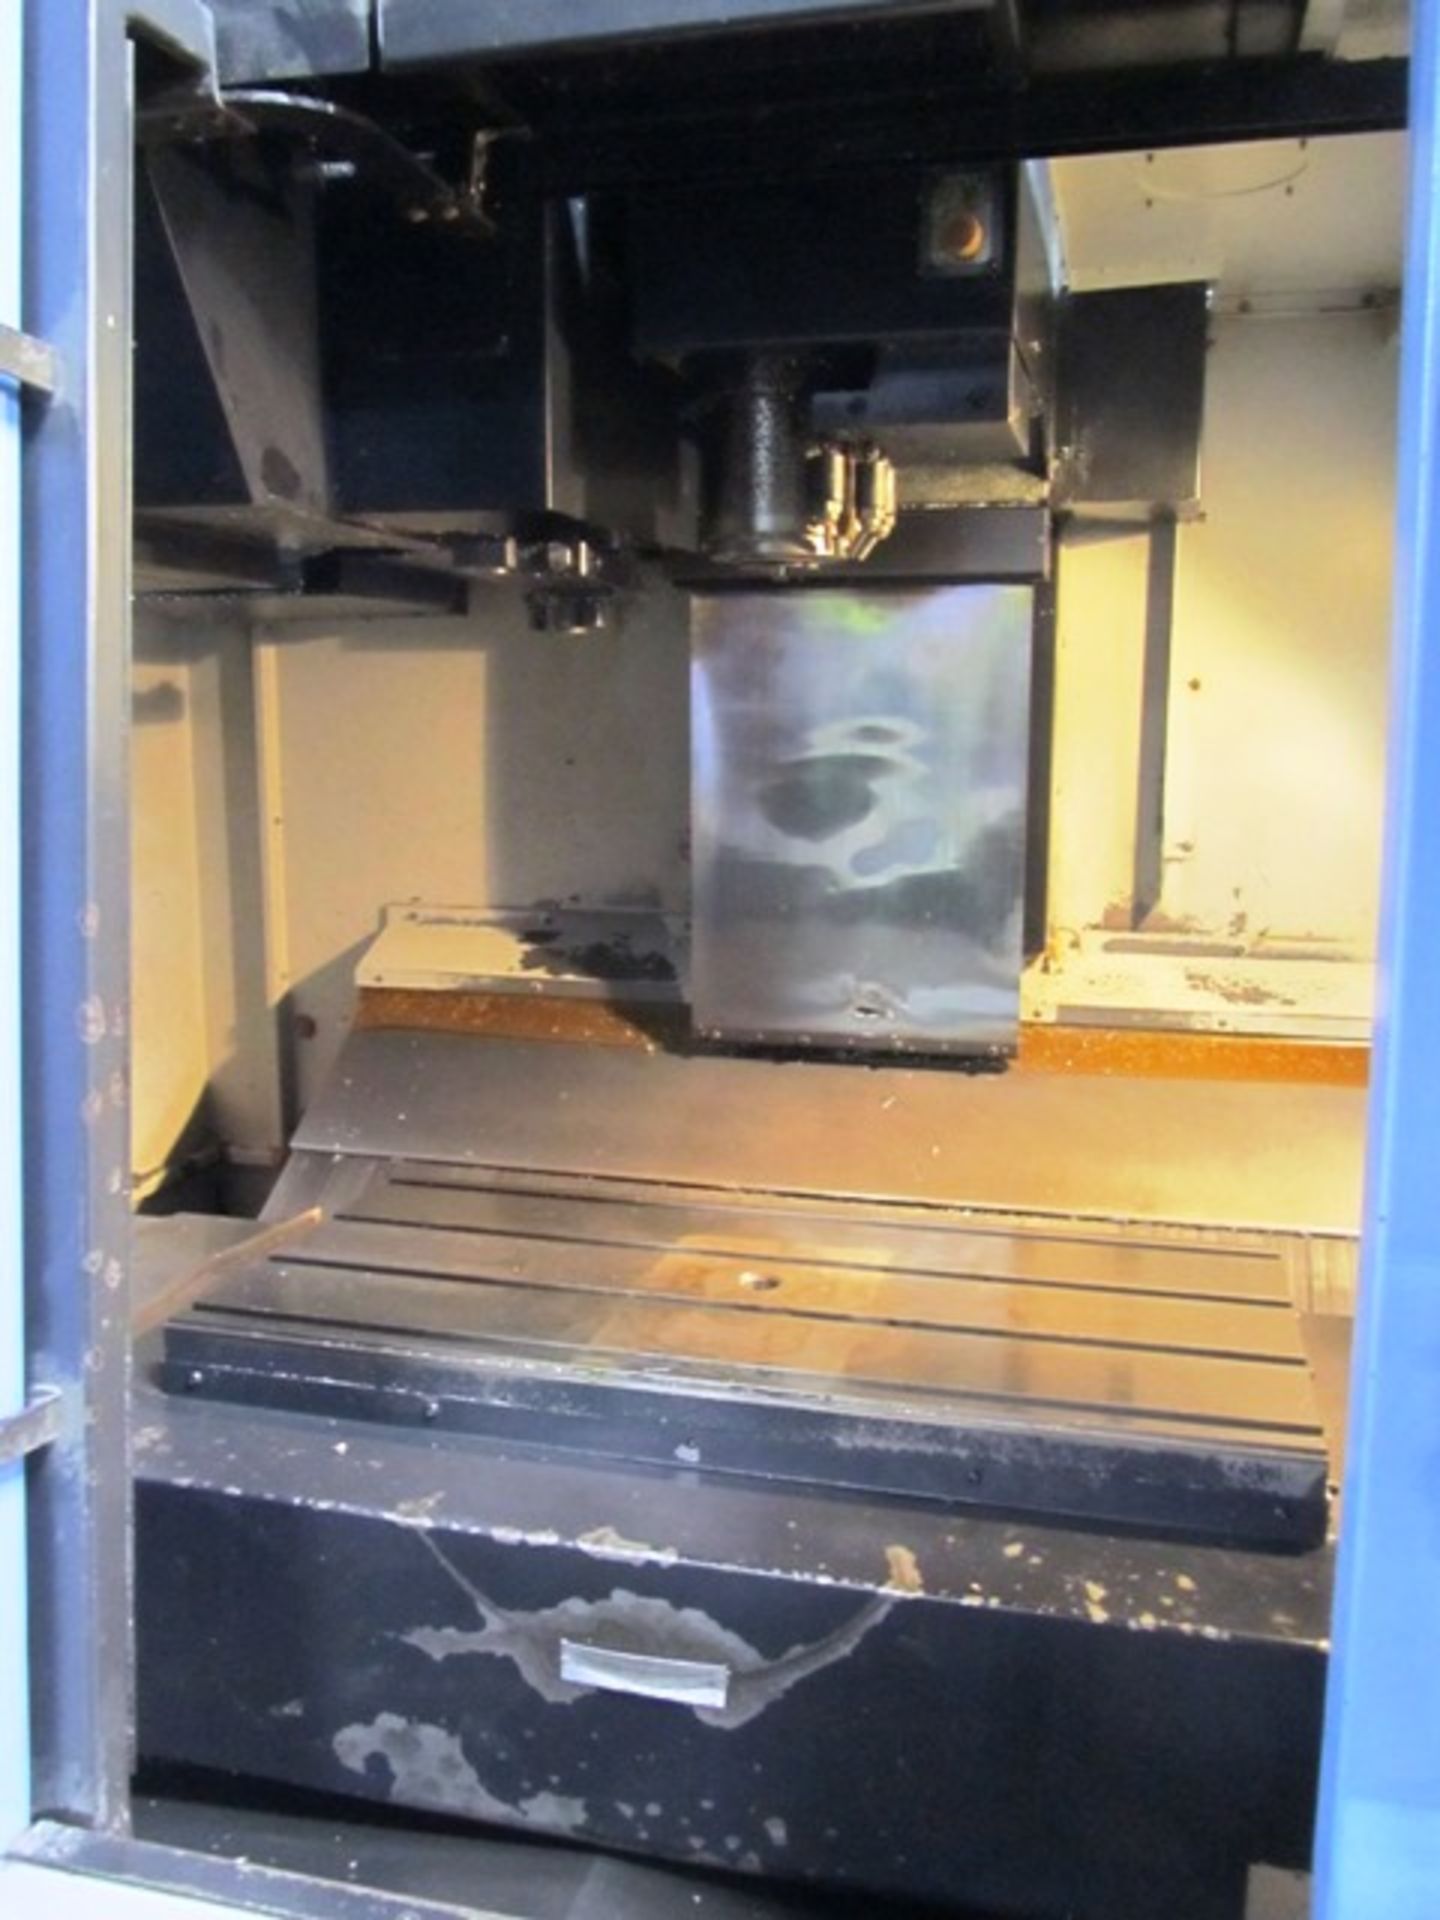 Doosan MV 3016L CNC Vertical Machining Center with 37'' x 17'' Worktable, #40 Taper Spindle Speeds - Image 5 of 5